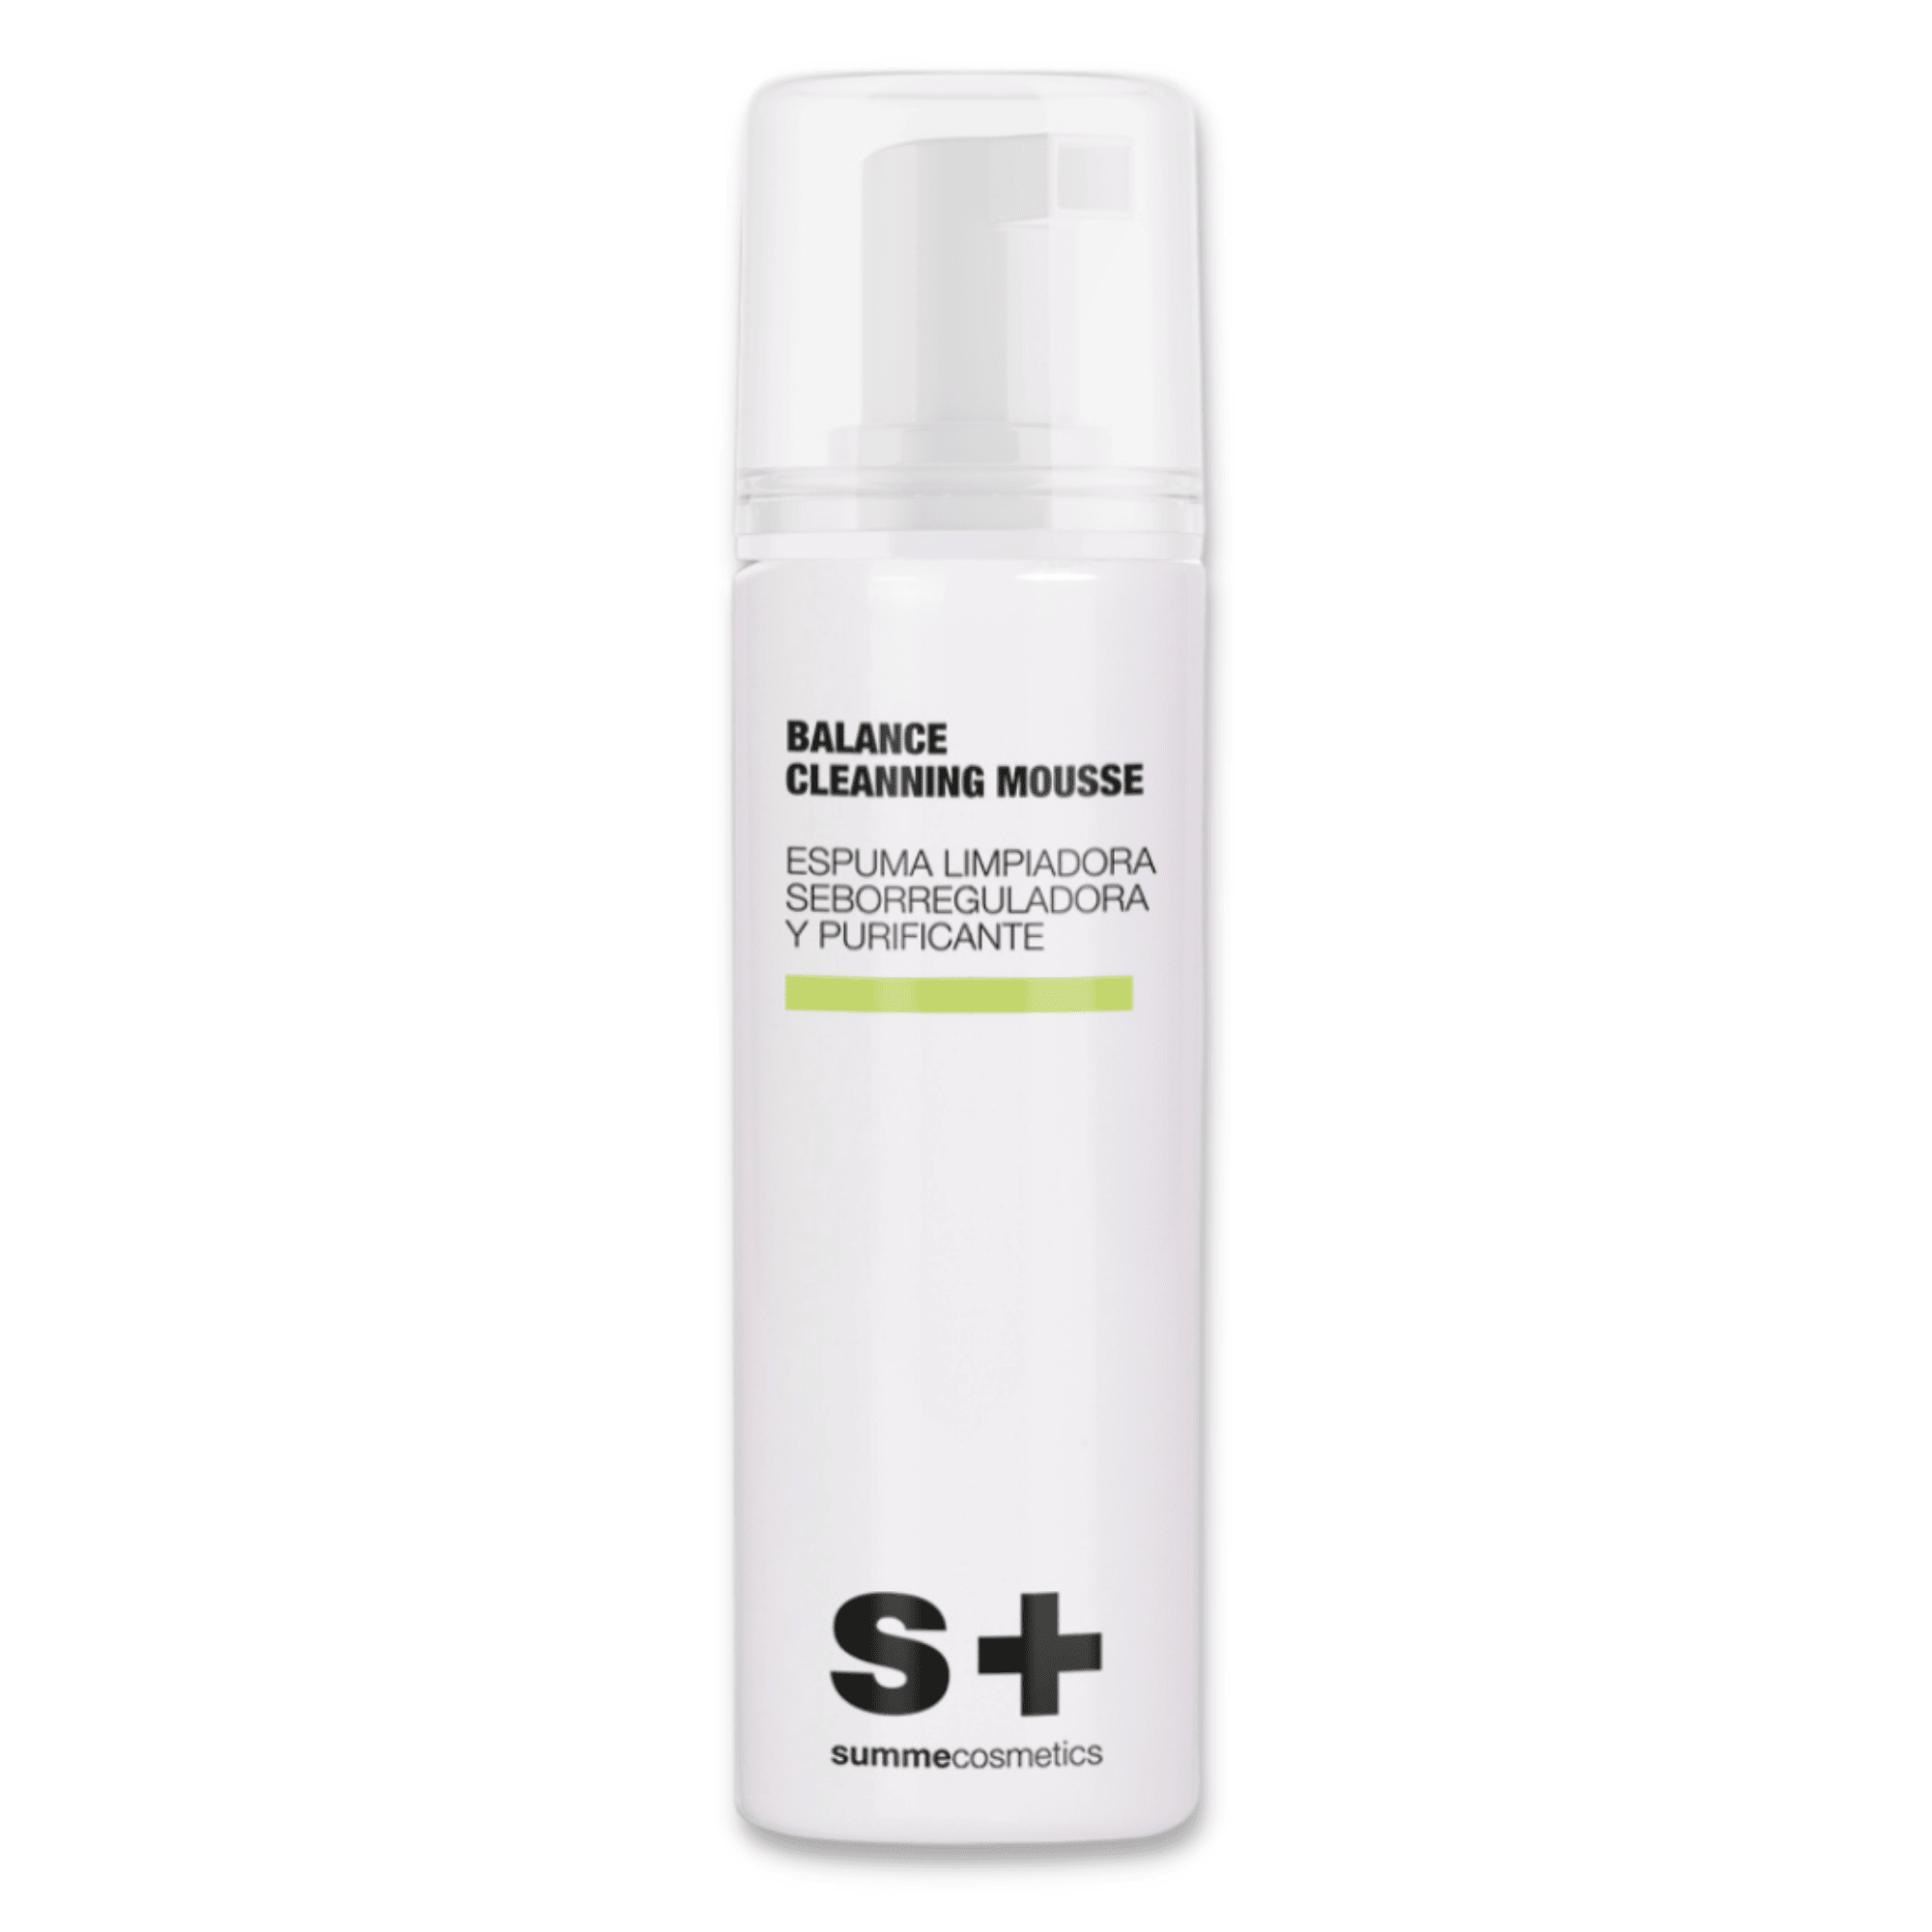 Summe Cosmetics Balance Cleanning Mousse